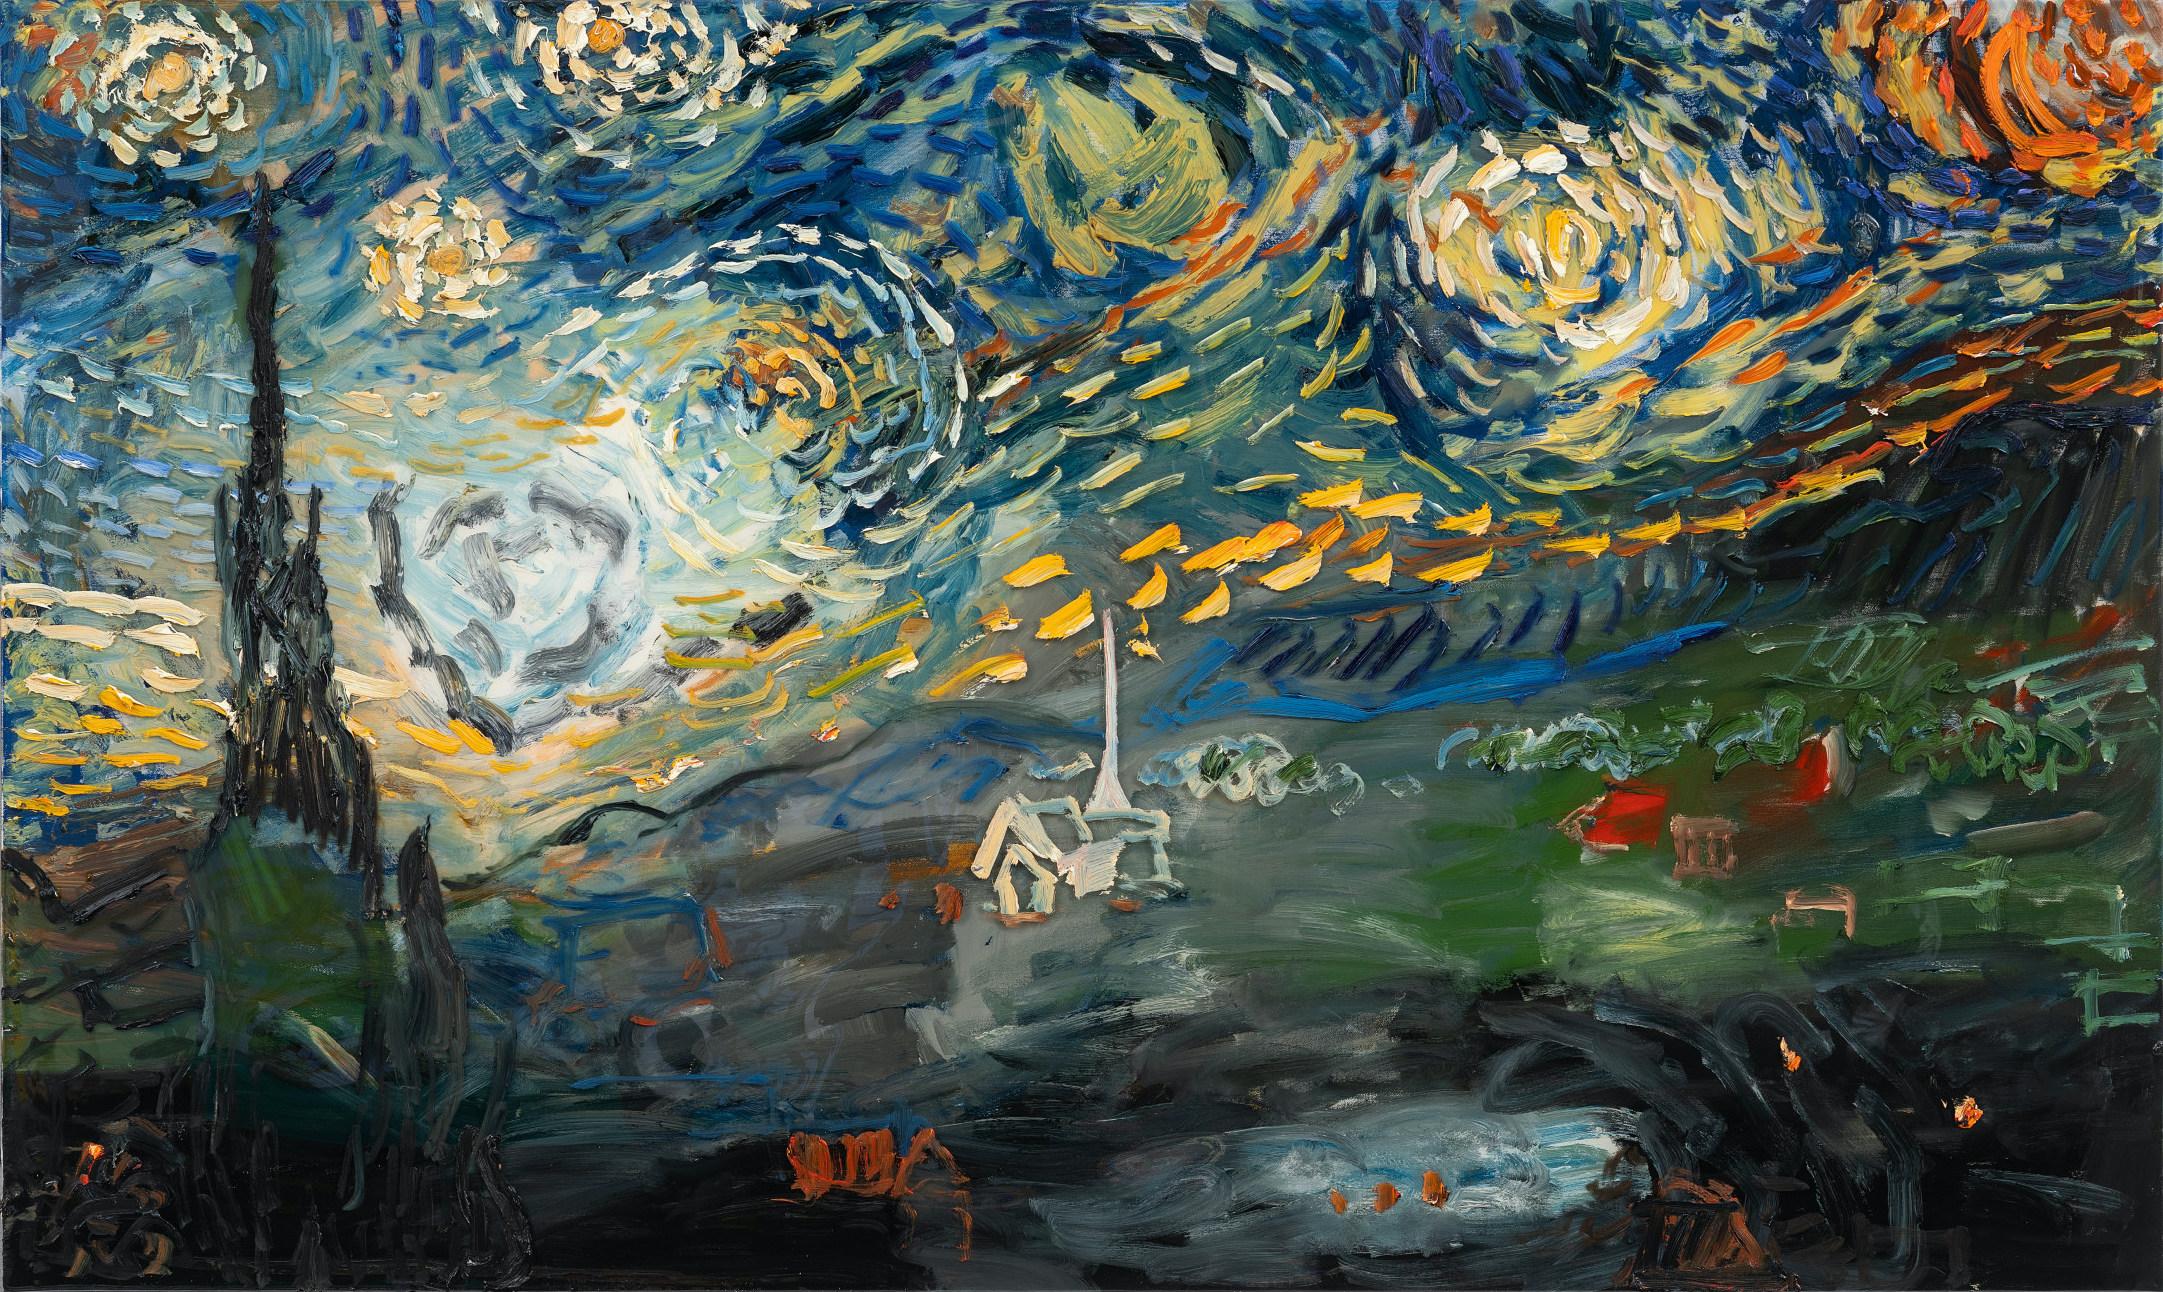 "Starry Night 2"  Neo Abstract Expressionist take on Van Gogh's famous painting